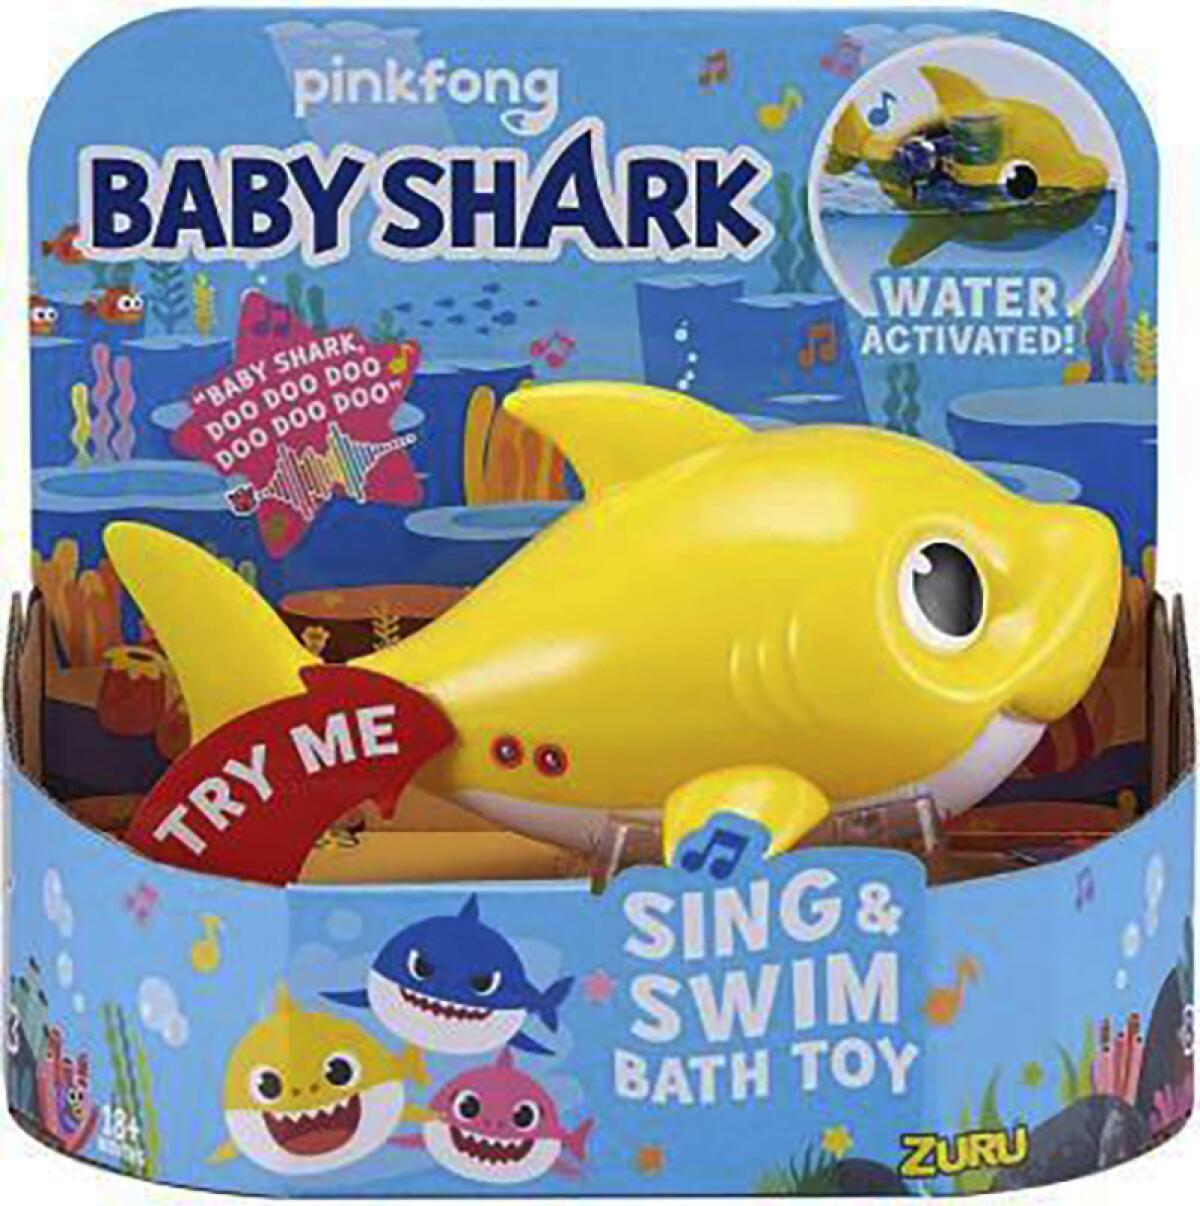 A Baby Shark Sing & Swim Bath Toy in its retail packaging